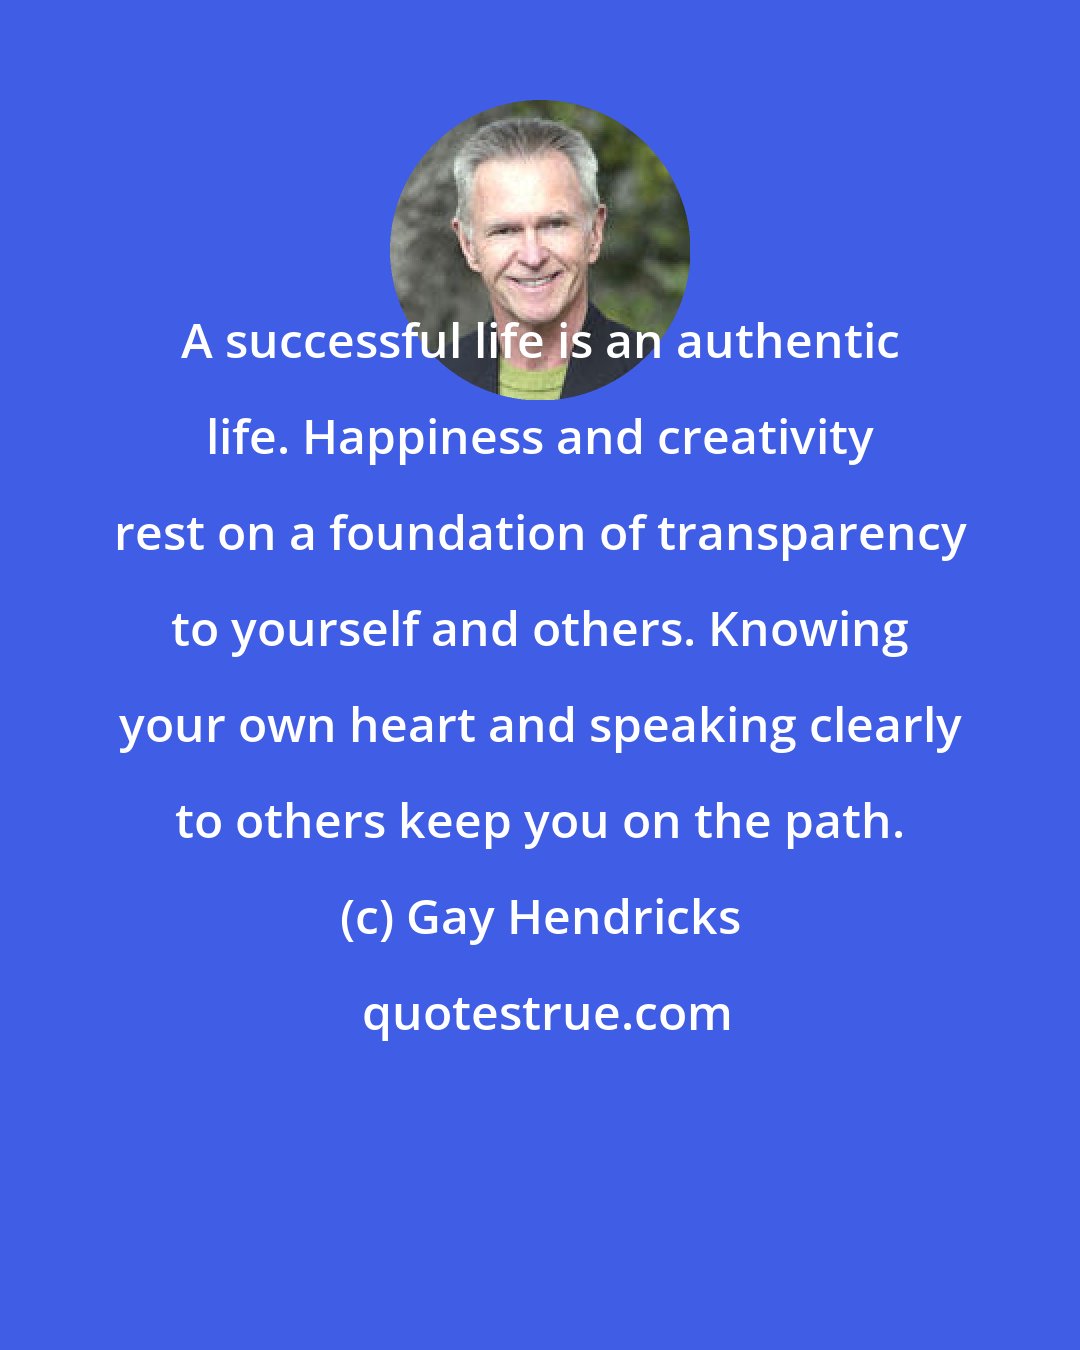 Gay Hendricks: A successful life is an authentic life. Happiness and creativity rest on a foundation of transparency to yourself and others. Knowing your own heart and speaking clearly to others keep you on the path.